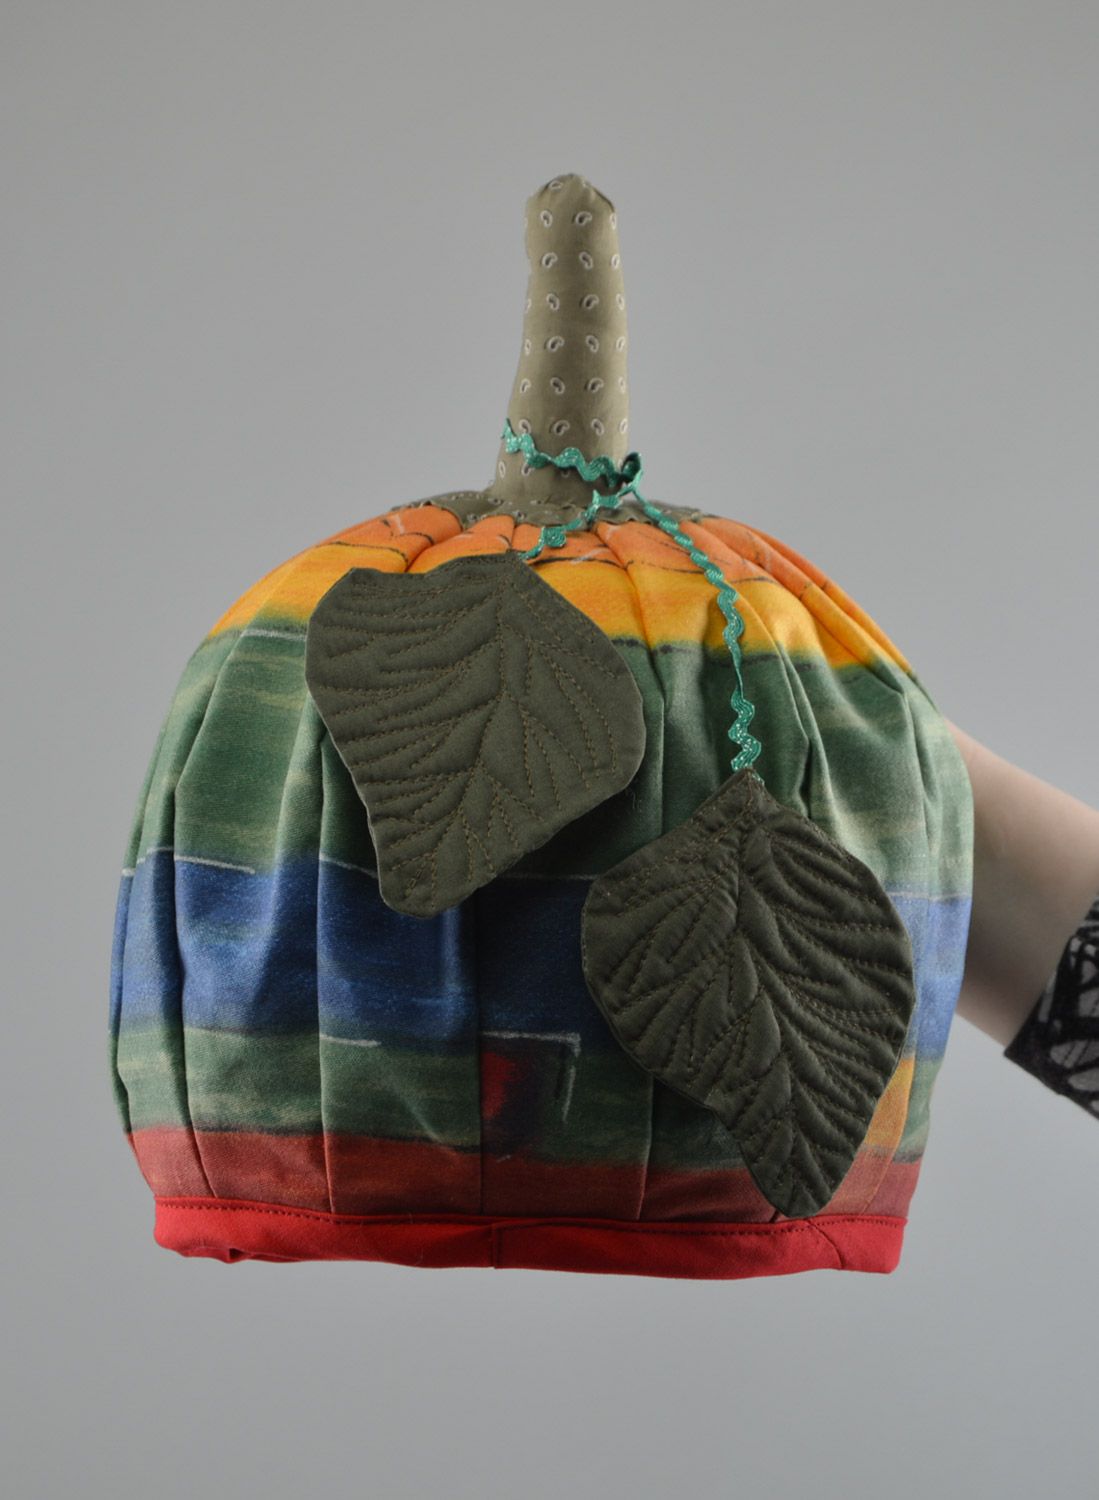 Handmade warm teapot cozy sewn of cotton in the shape of colorful pumpkin photo 2